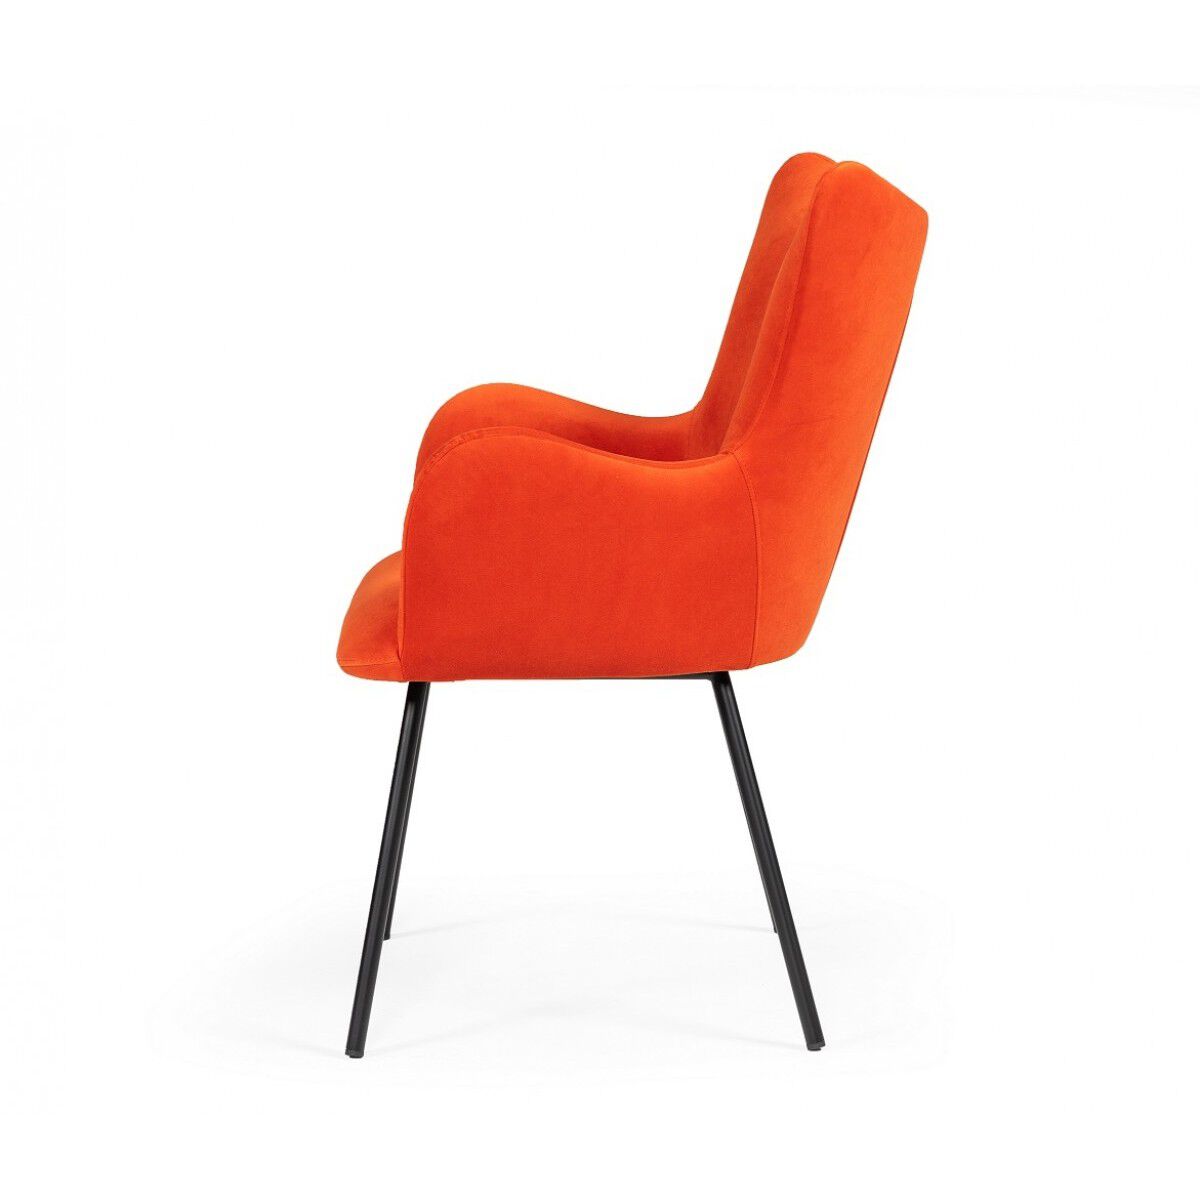 Fabric Upholstered Dining Chair with Winged Back and Curved Arms, Orange